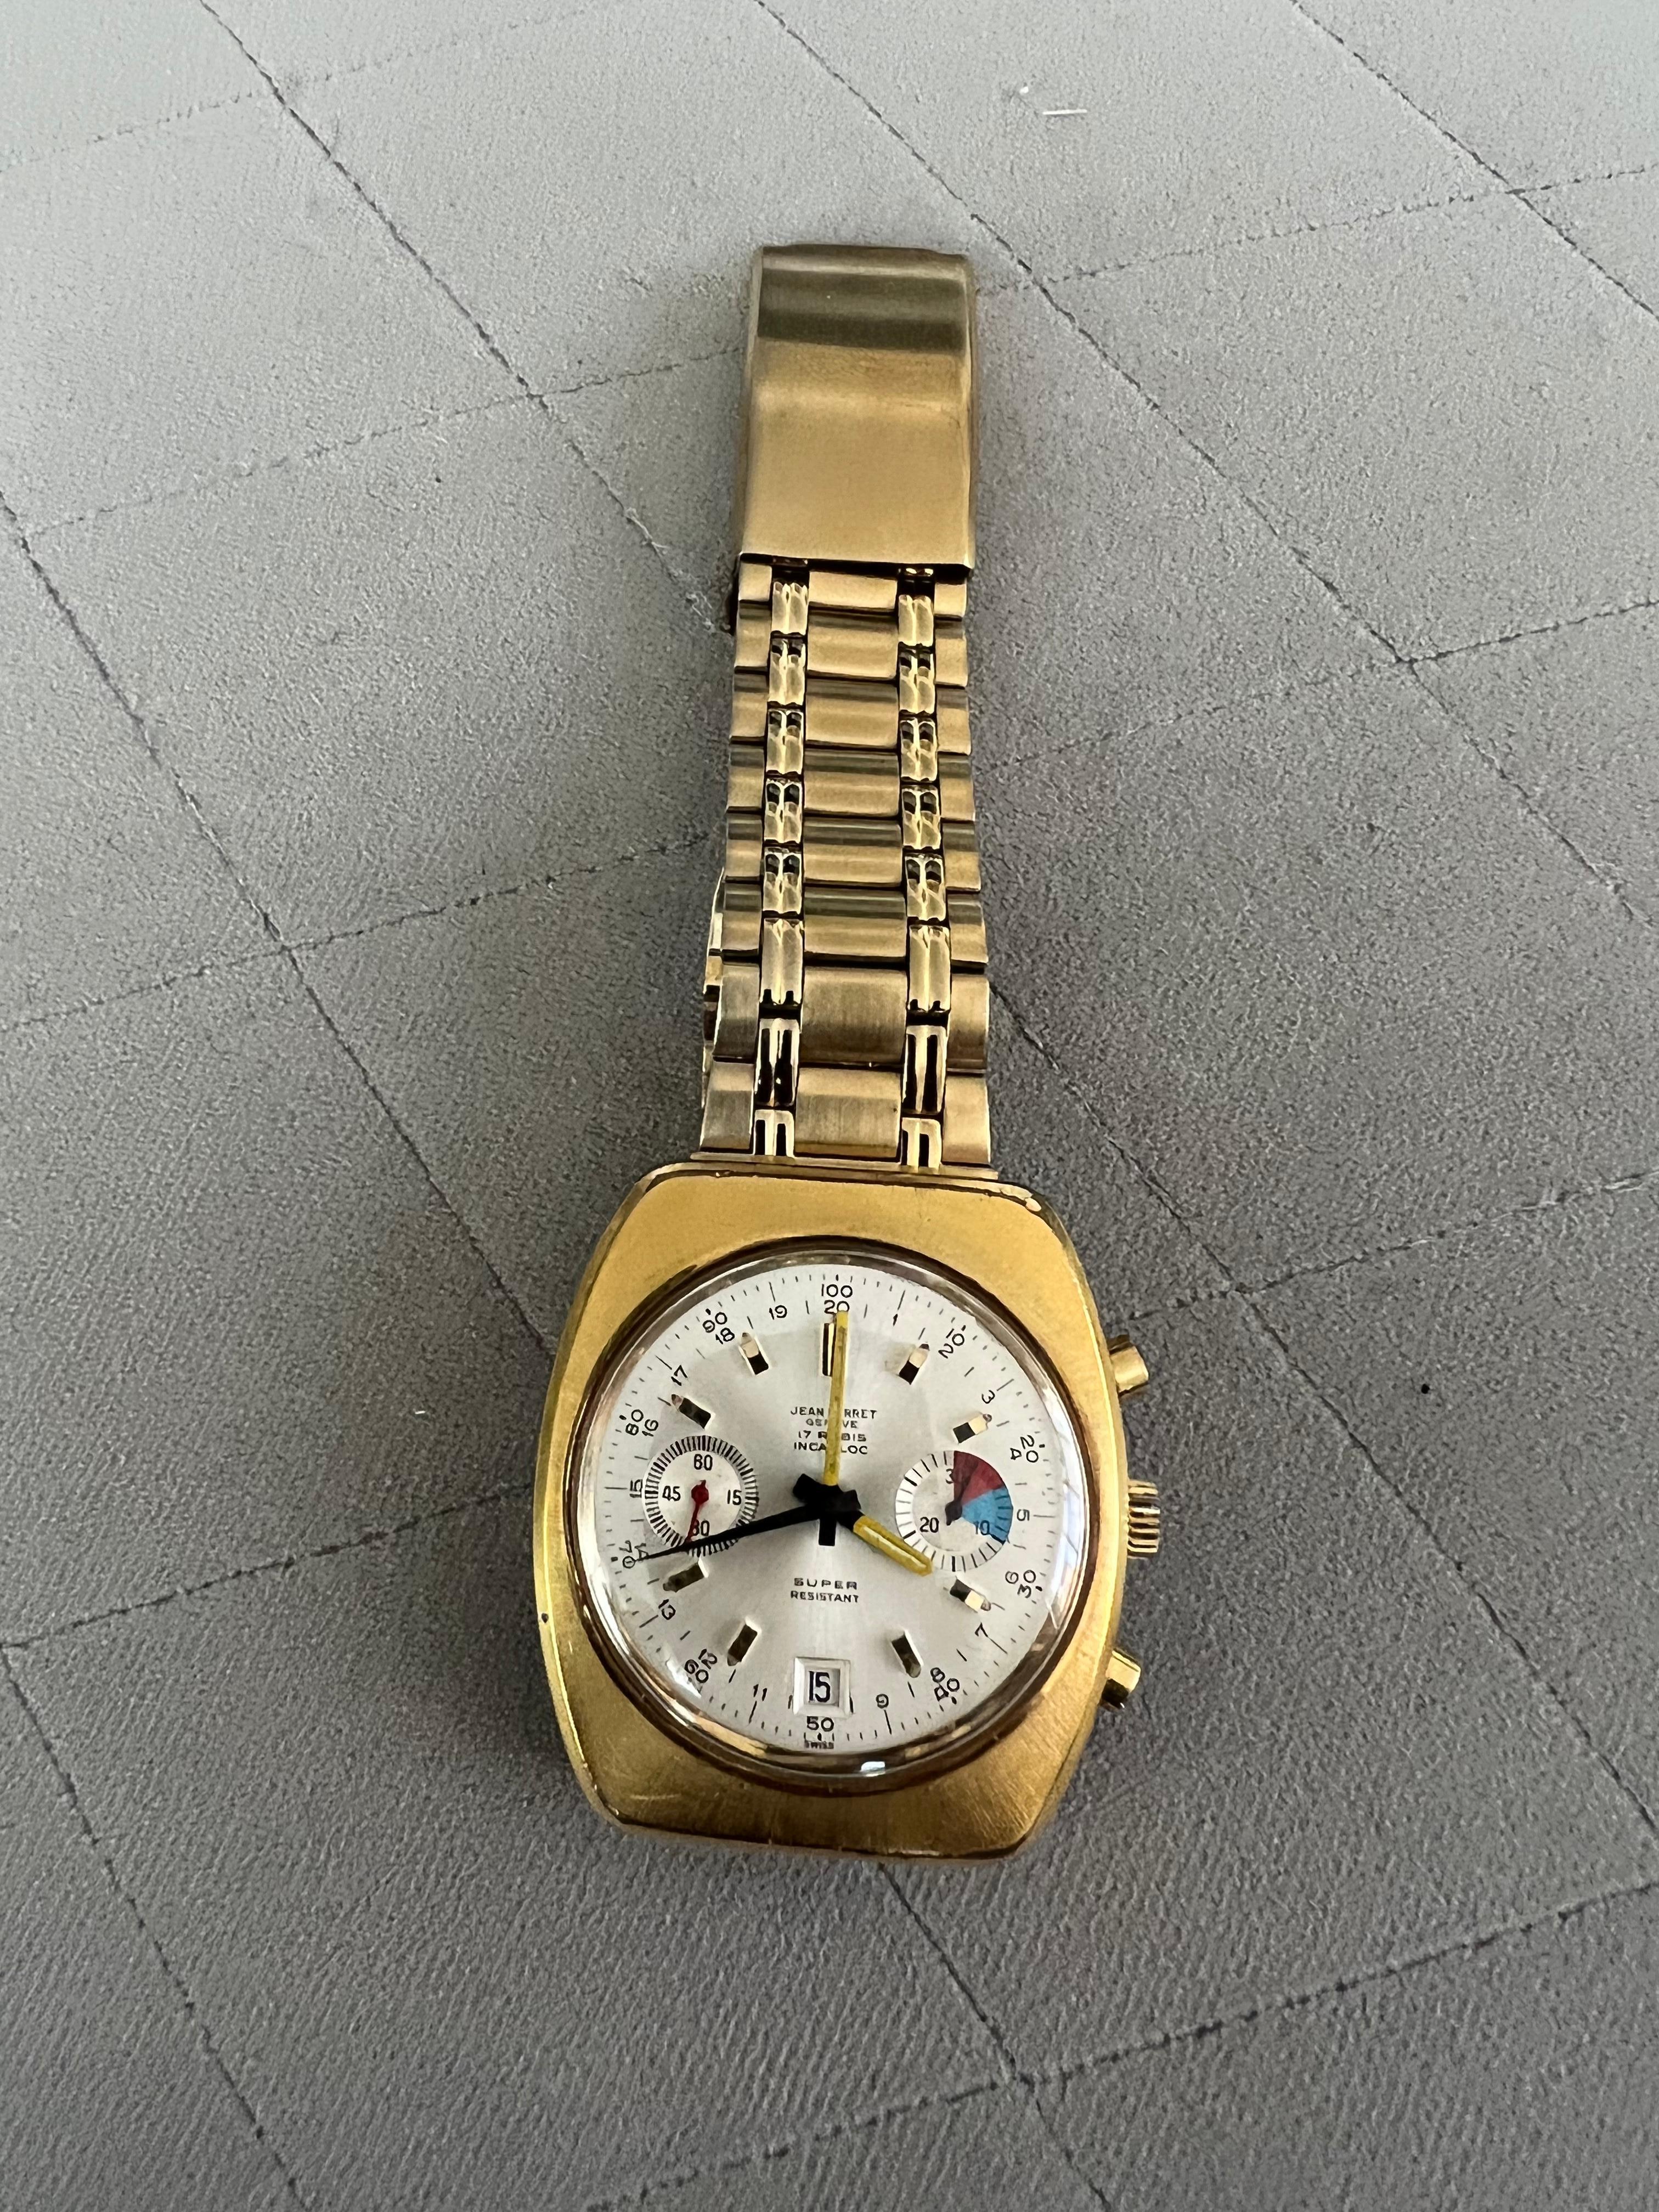 Rare Jean Perret Geneve QJ 3826 Gold Plated & Stainless Steel In Excellent Condition For Sale In New York, NY